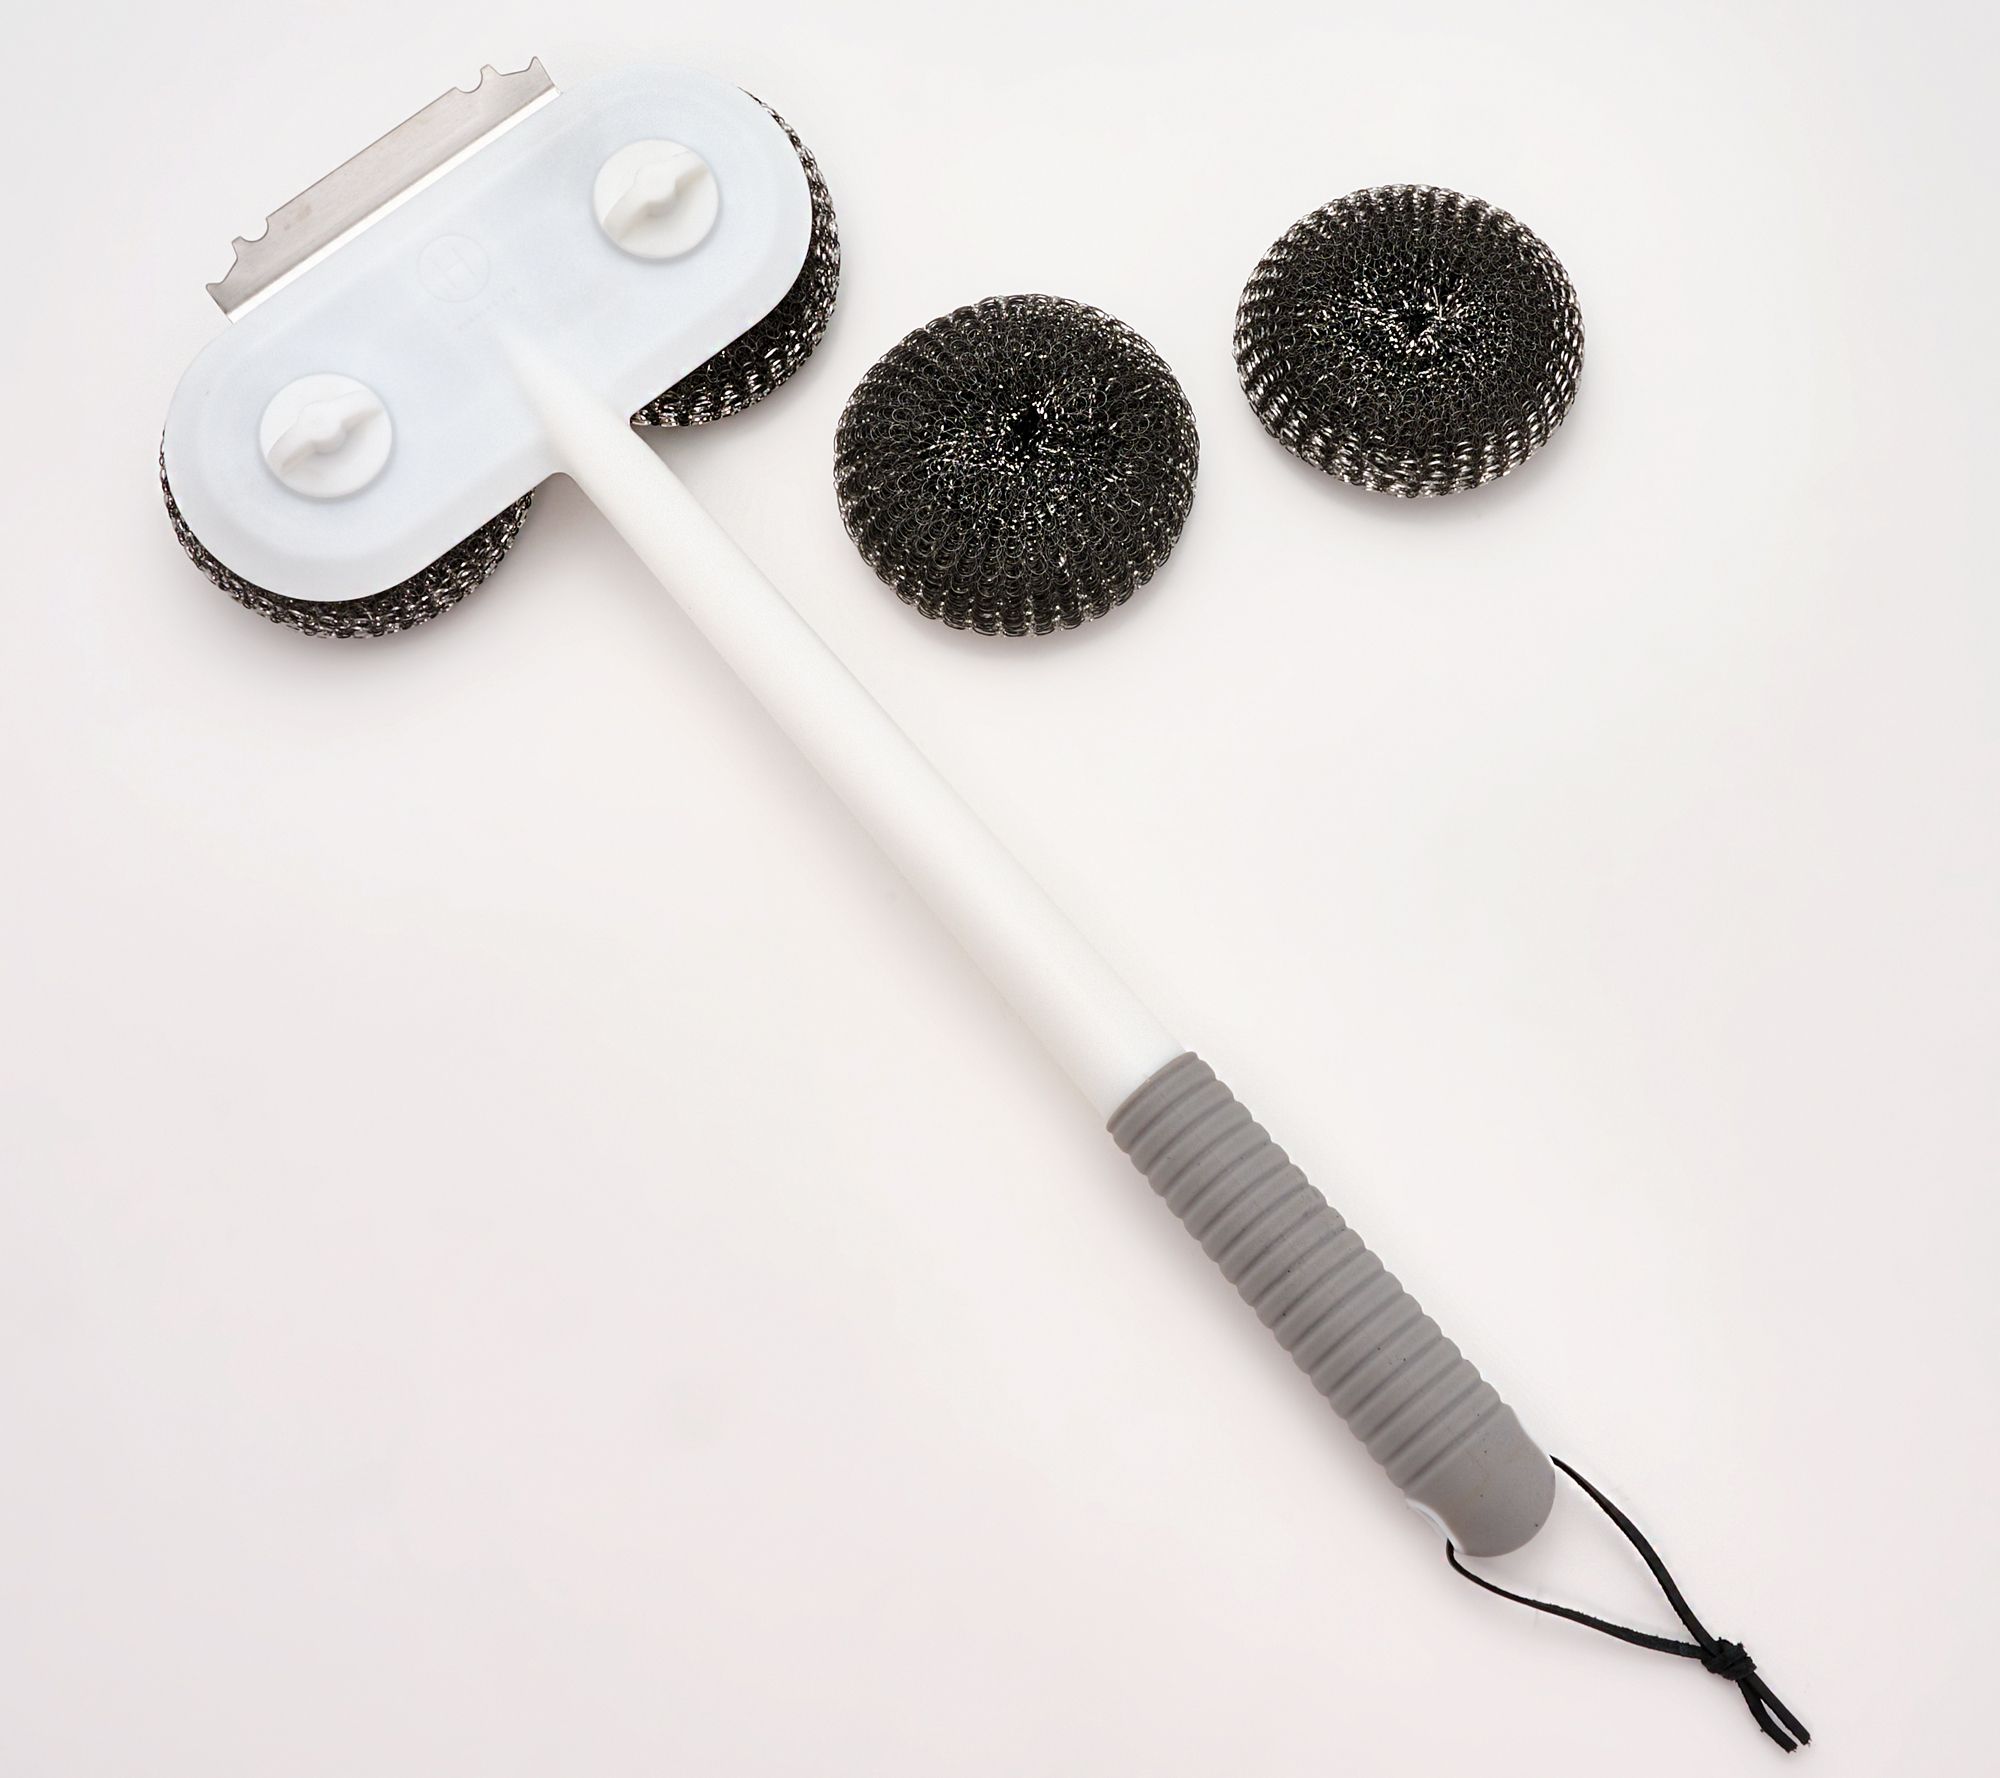 Bristle-Free Barbecue Brush - Lee Valley Tools